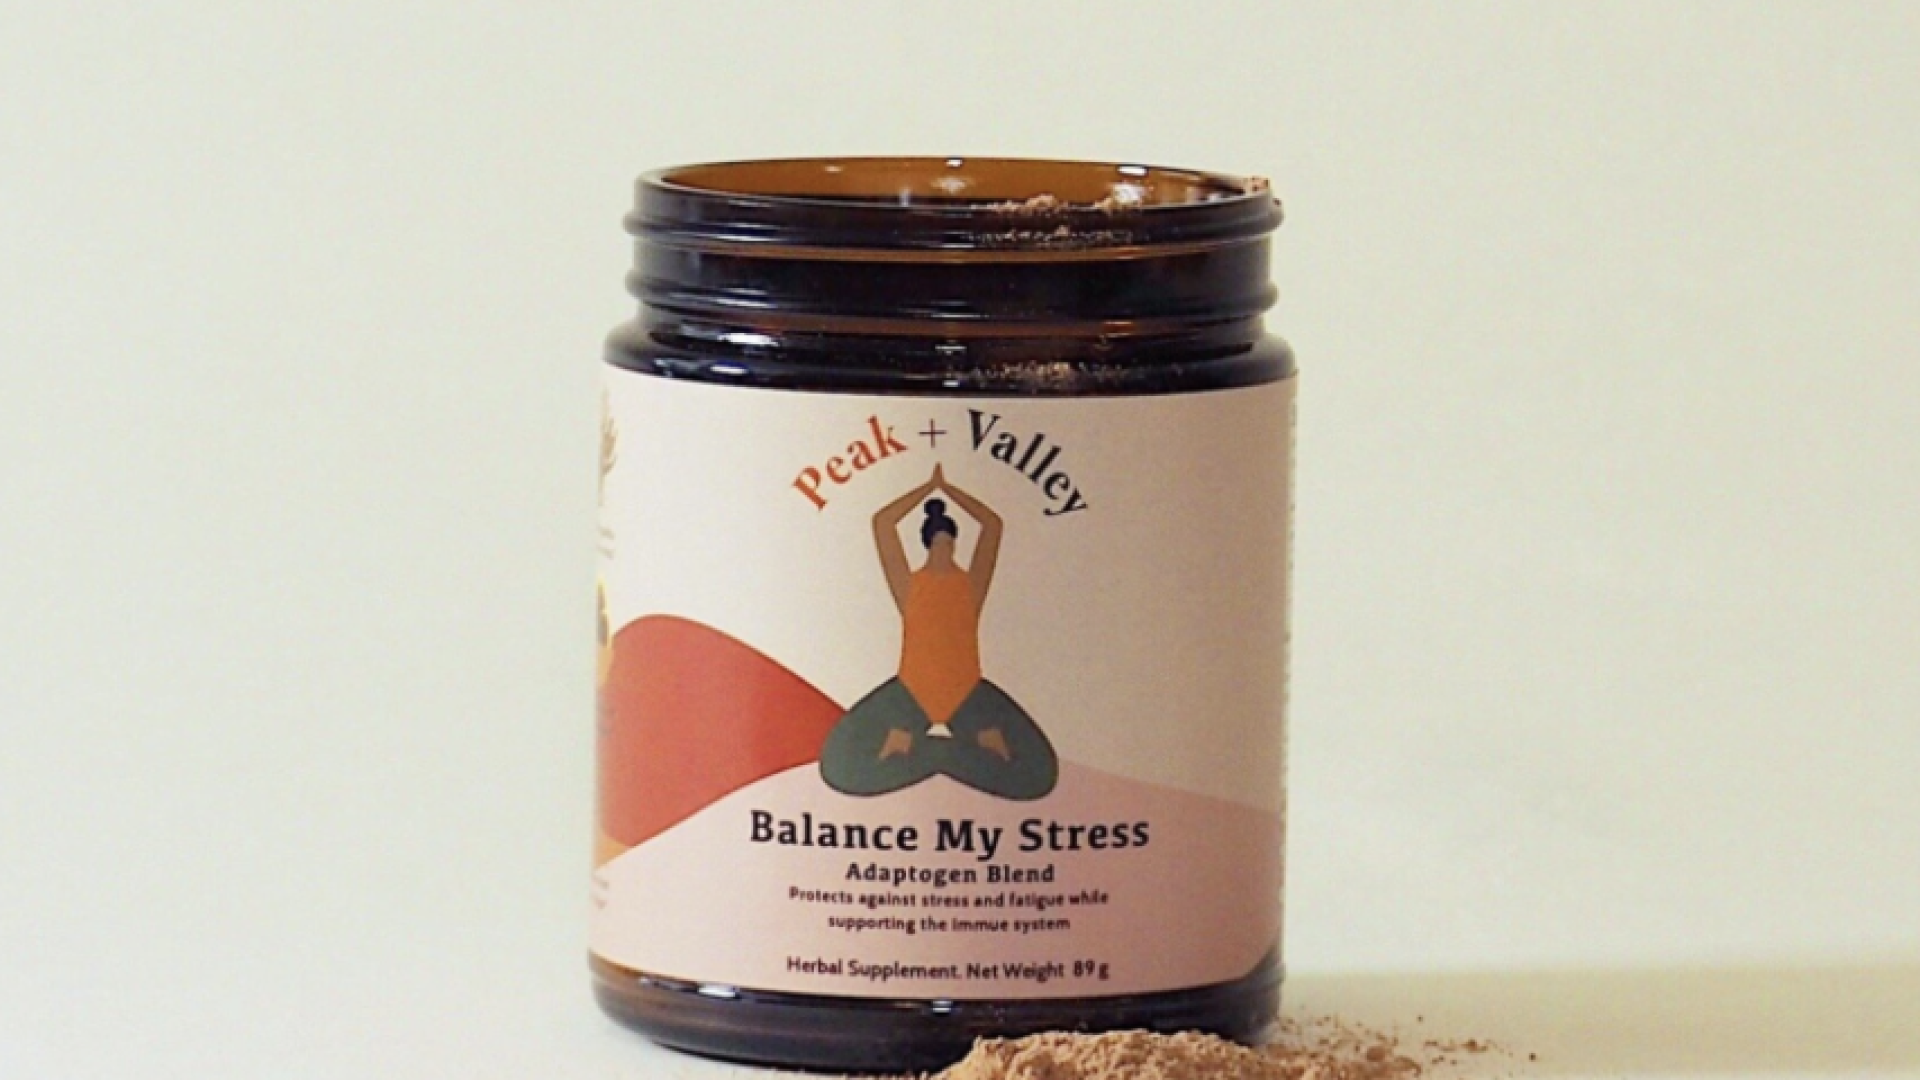 Balance Your Mood and Decrease Stress With These Products